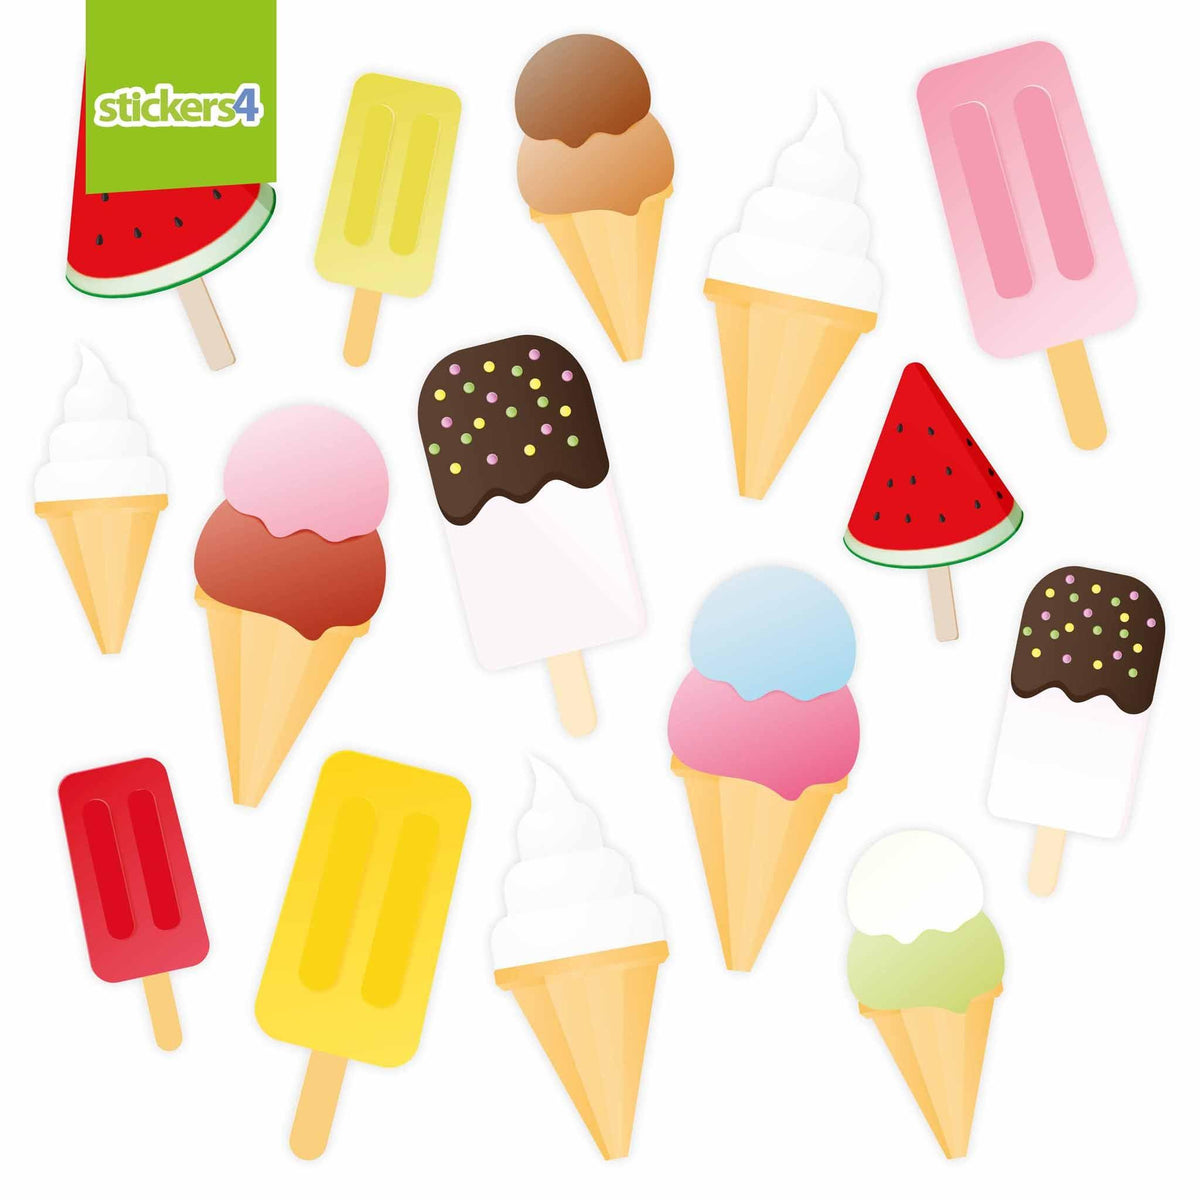 Pack of 15 Mixed Ice Lollies Summer Window Display